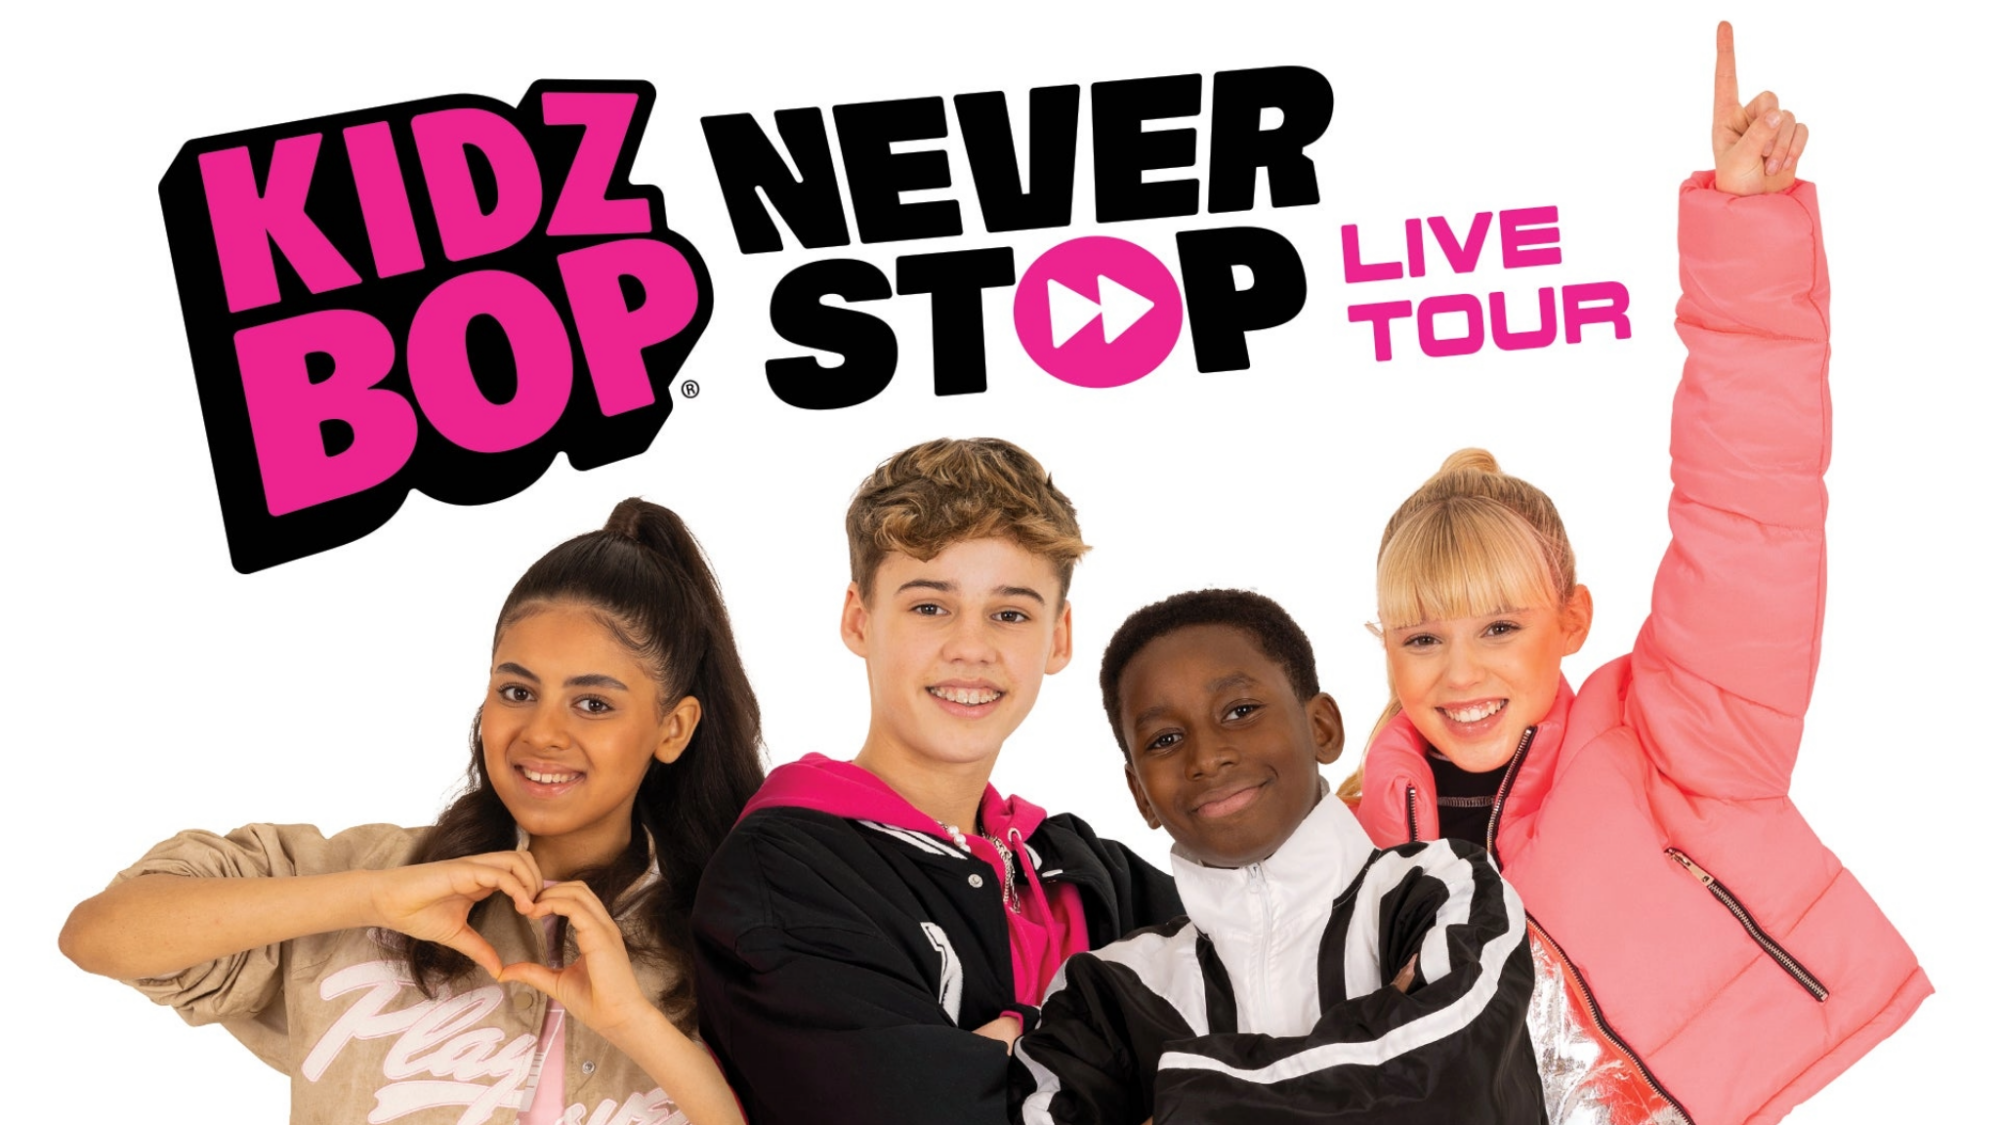 Image name KIDZ BOP Never Stop Live Tour at Sheffield City Hall Oval Hall Sheffield the 32 image from the post KIDZ BOP NEVER STOP TOUR at York Barbican, York in Yorkshire.com.